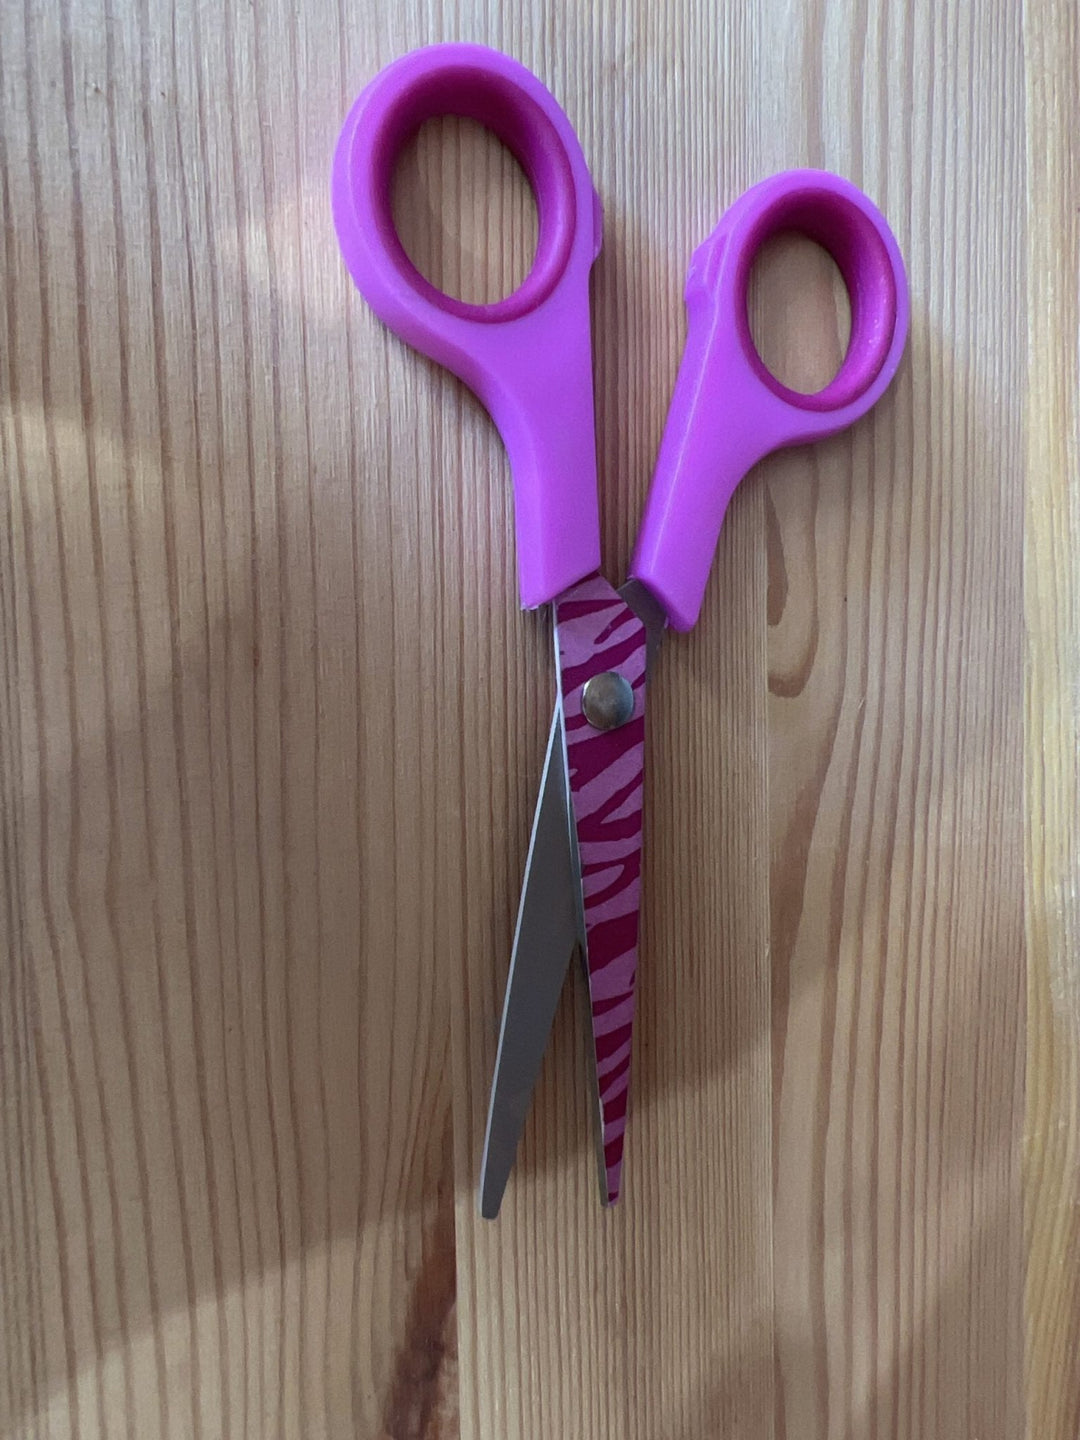 Faber-Castell Pointed Tip Scissors - Pink - #HolaNanu#NDIS #creativekids